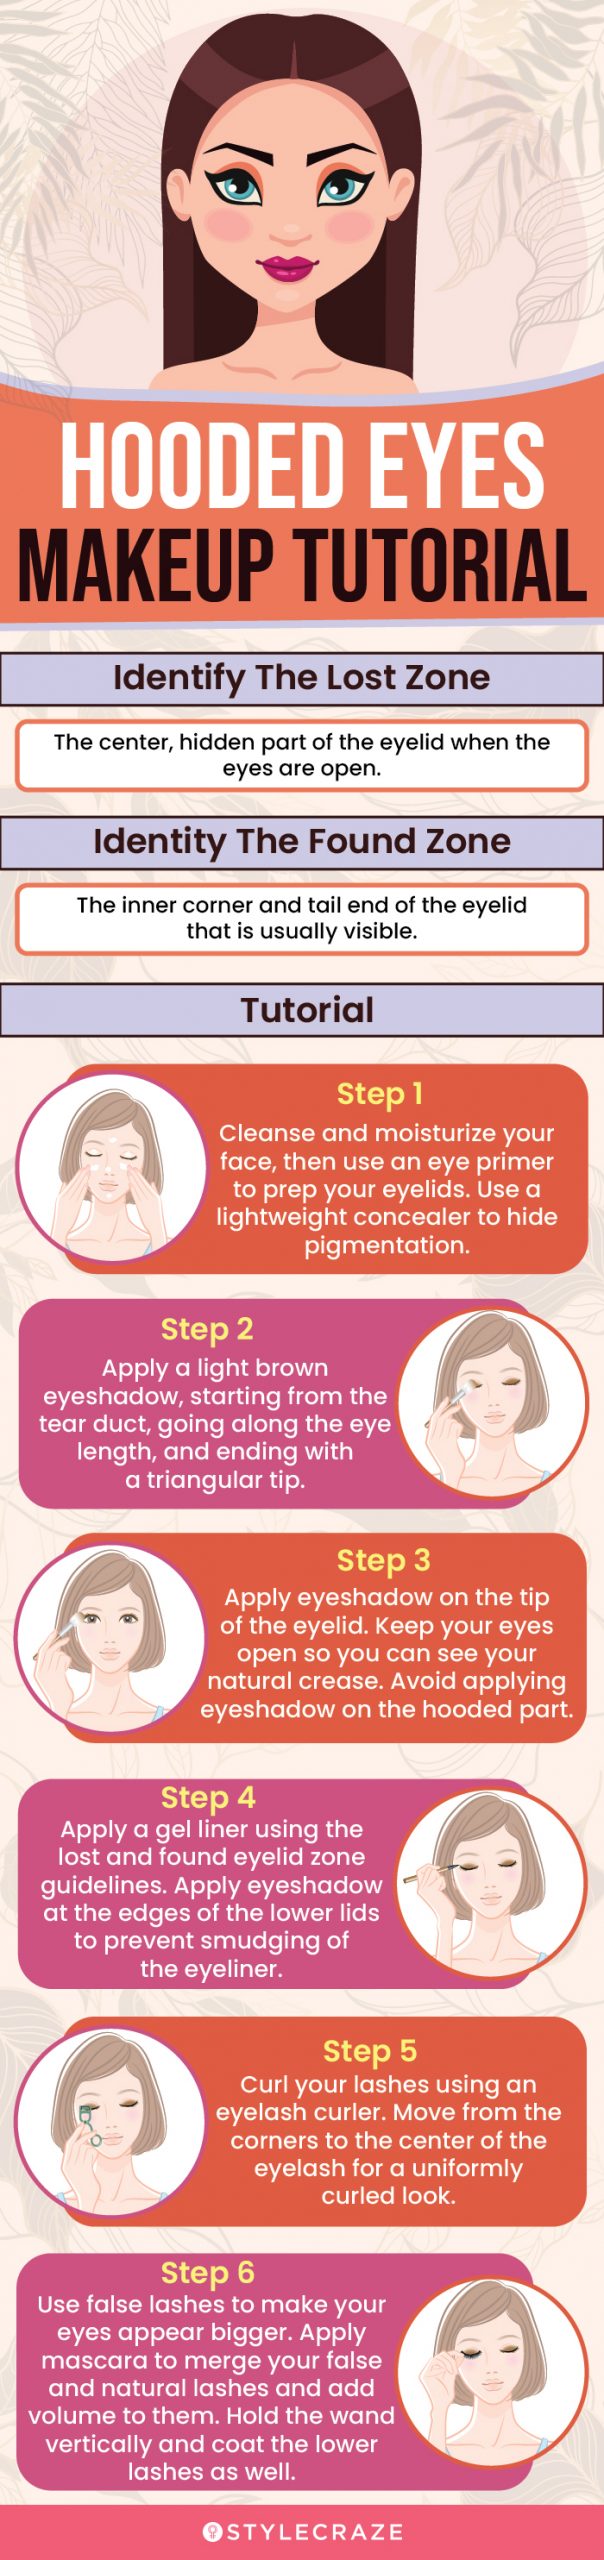 hooded eyes makeup tutorial (infographic)